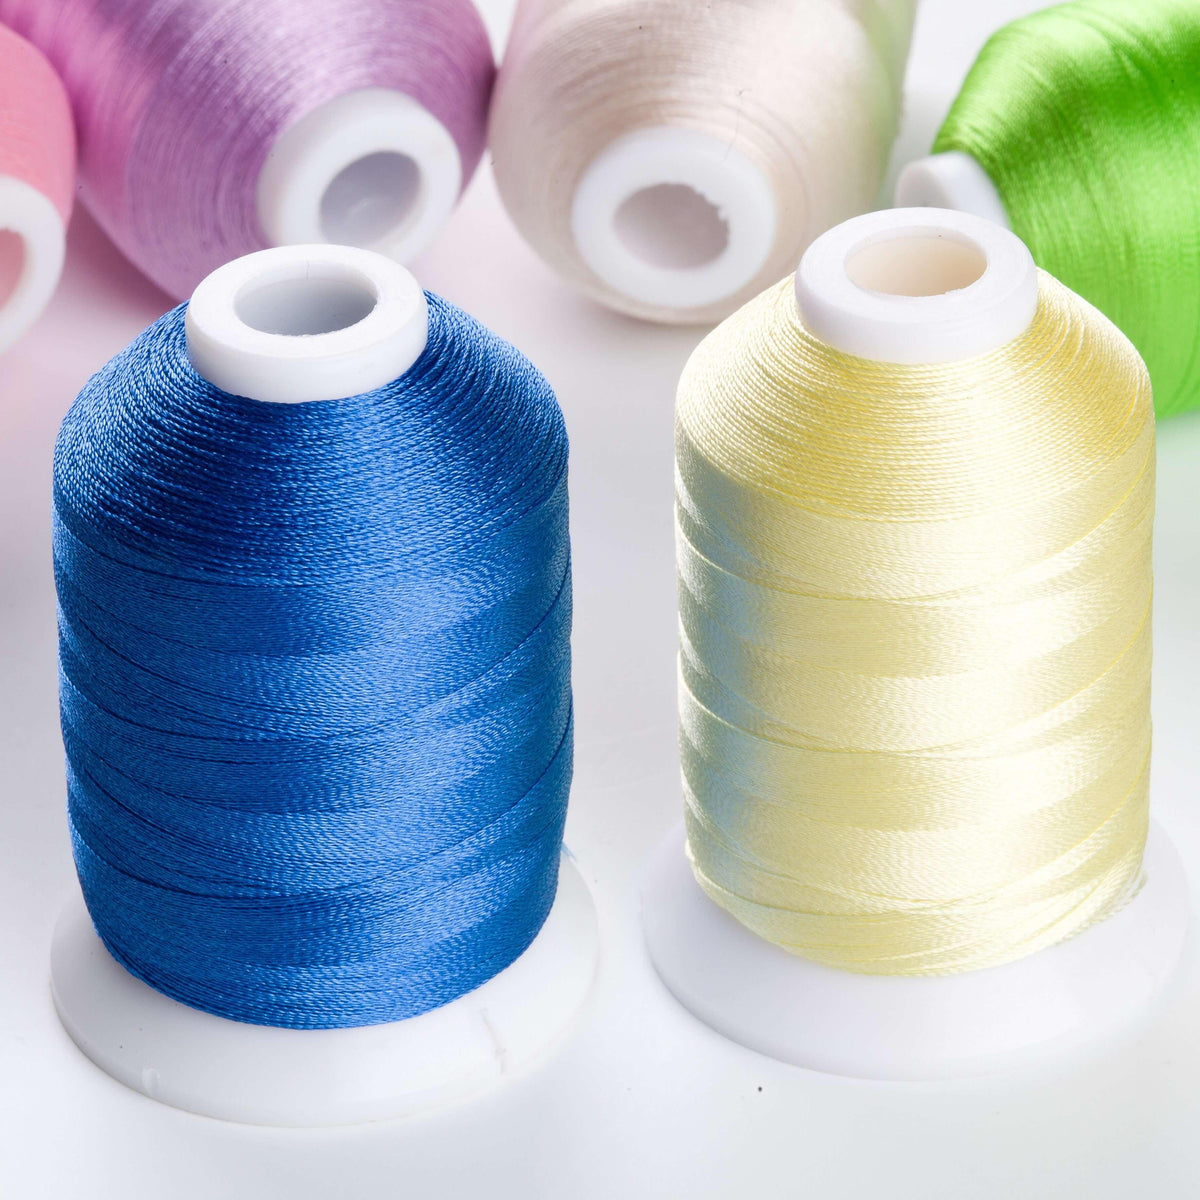 Simthread 10 Colors Reflective Embroidery Thread 1000M